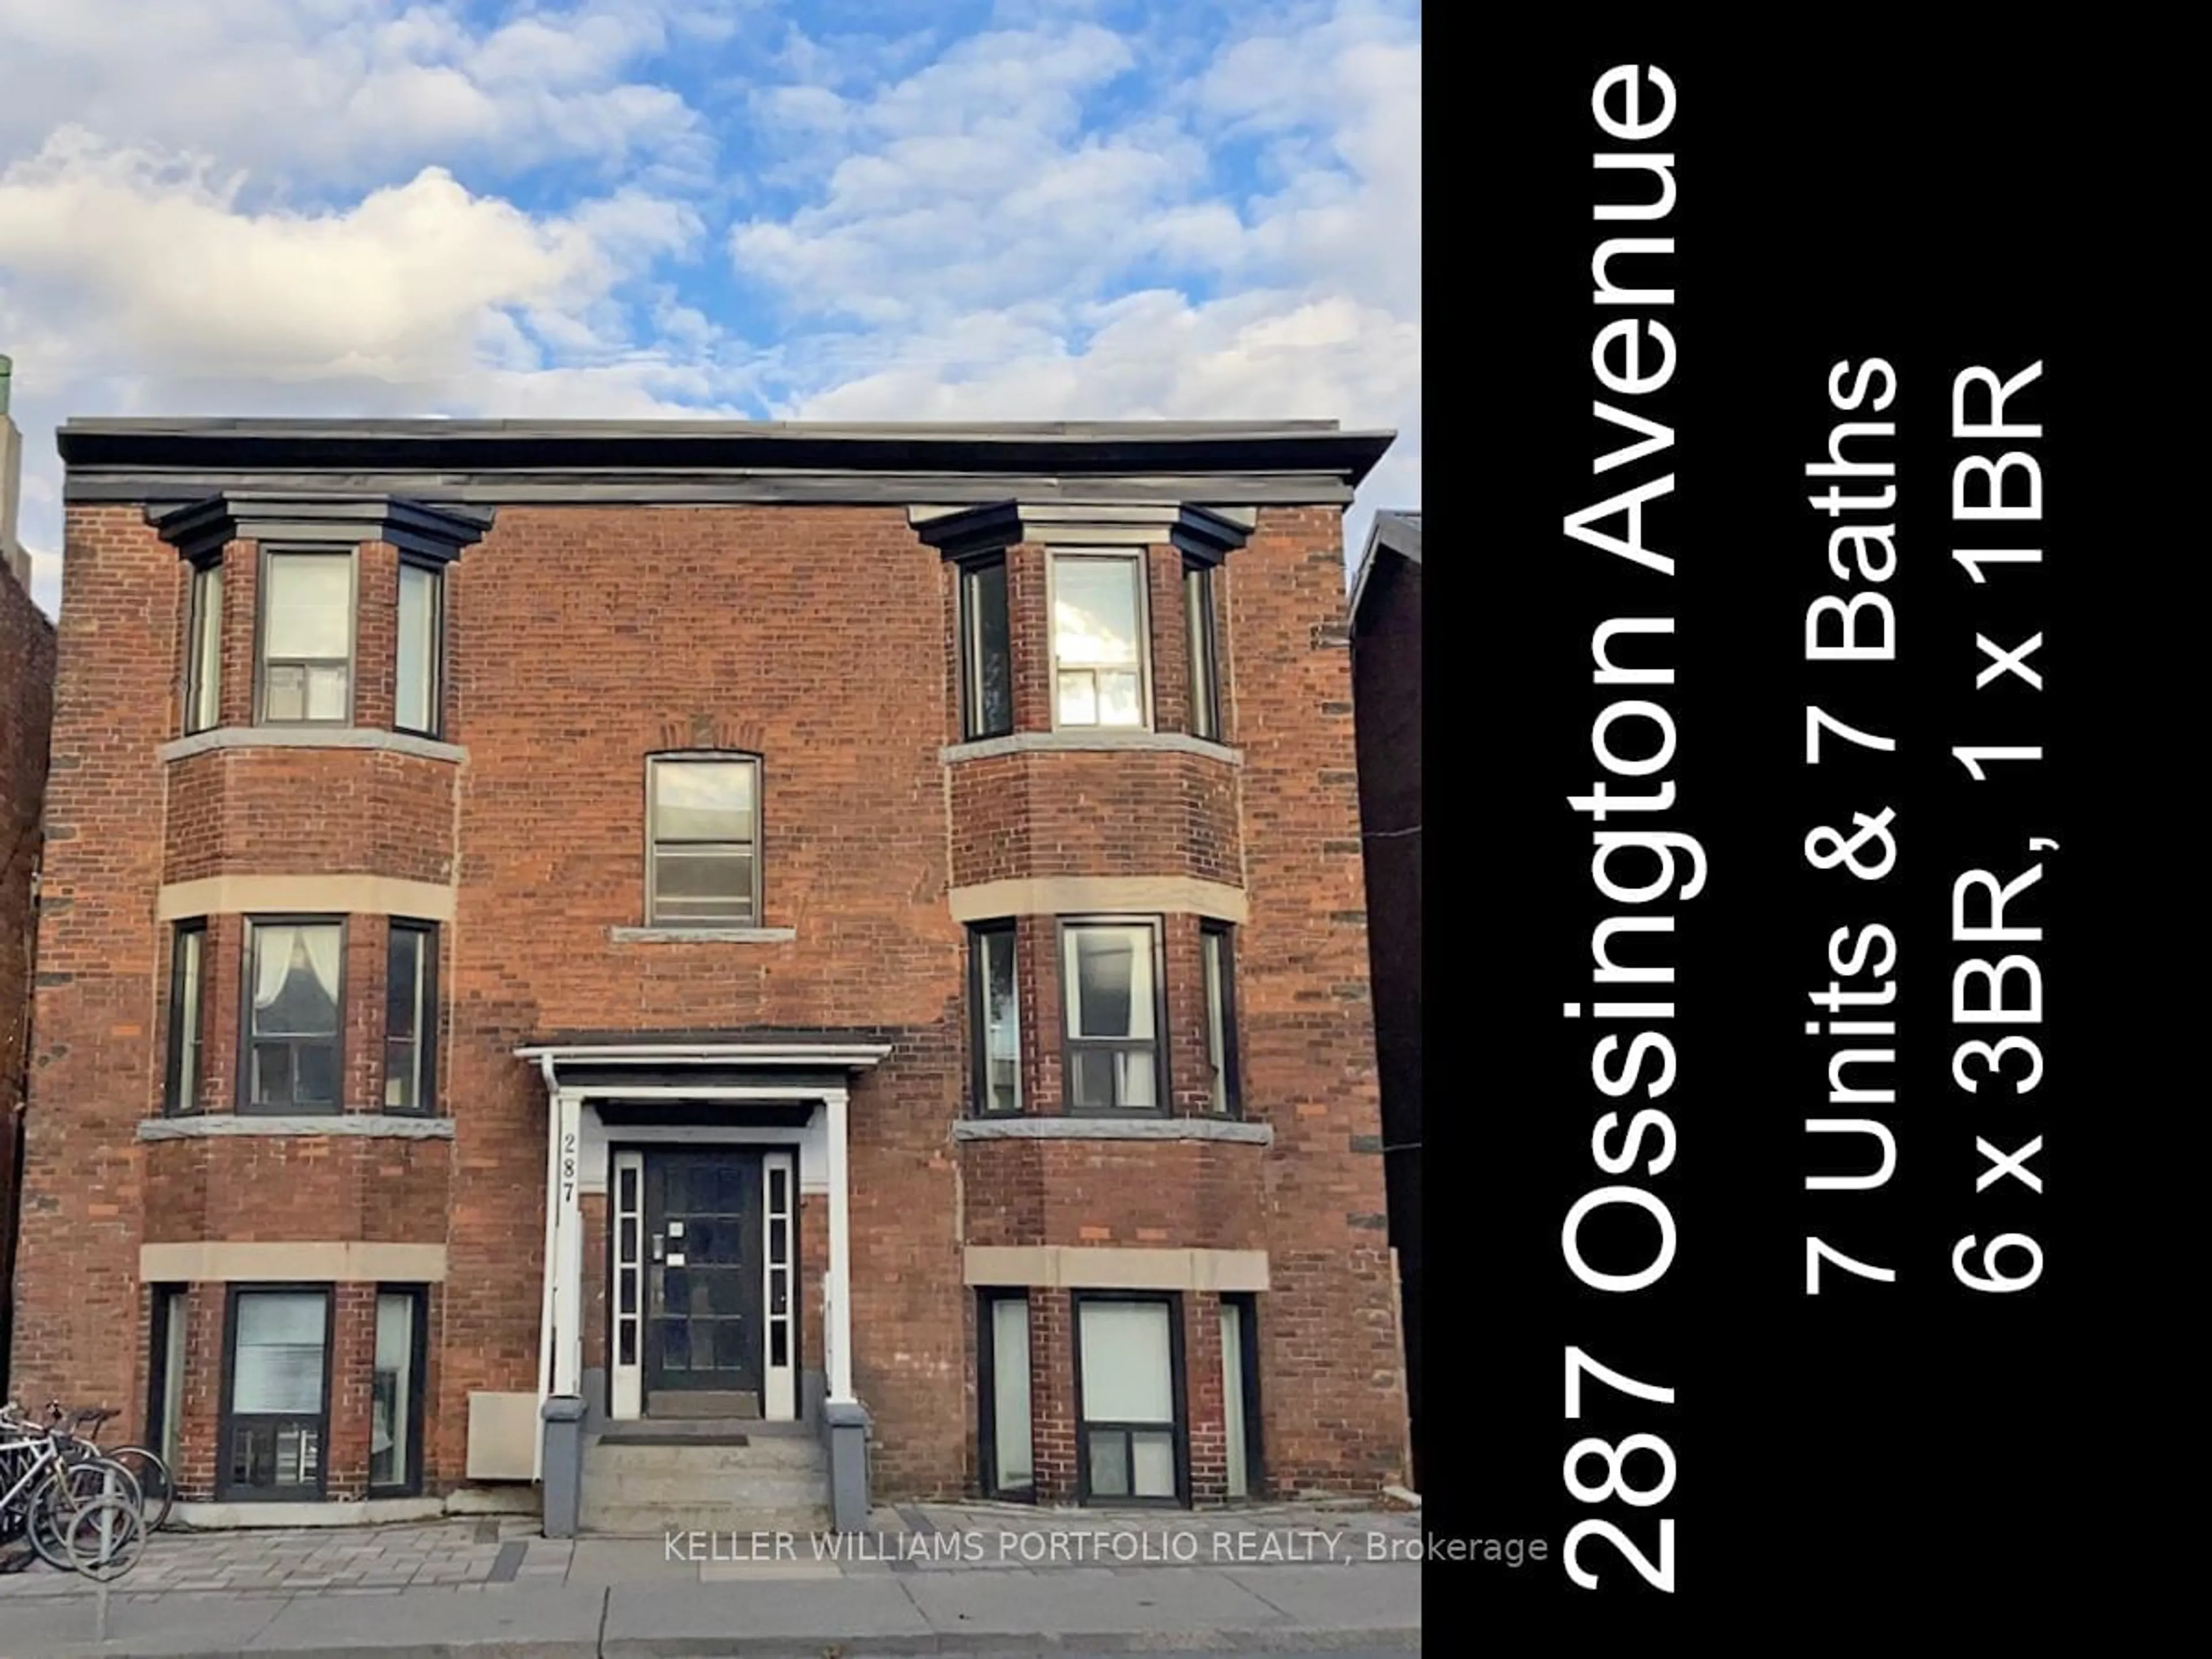 Home with unknown exterior material for 287 Ossington Ave, Toronto Ontario M6J 3A1